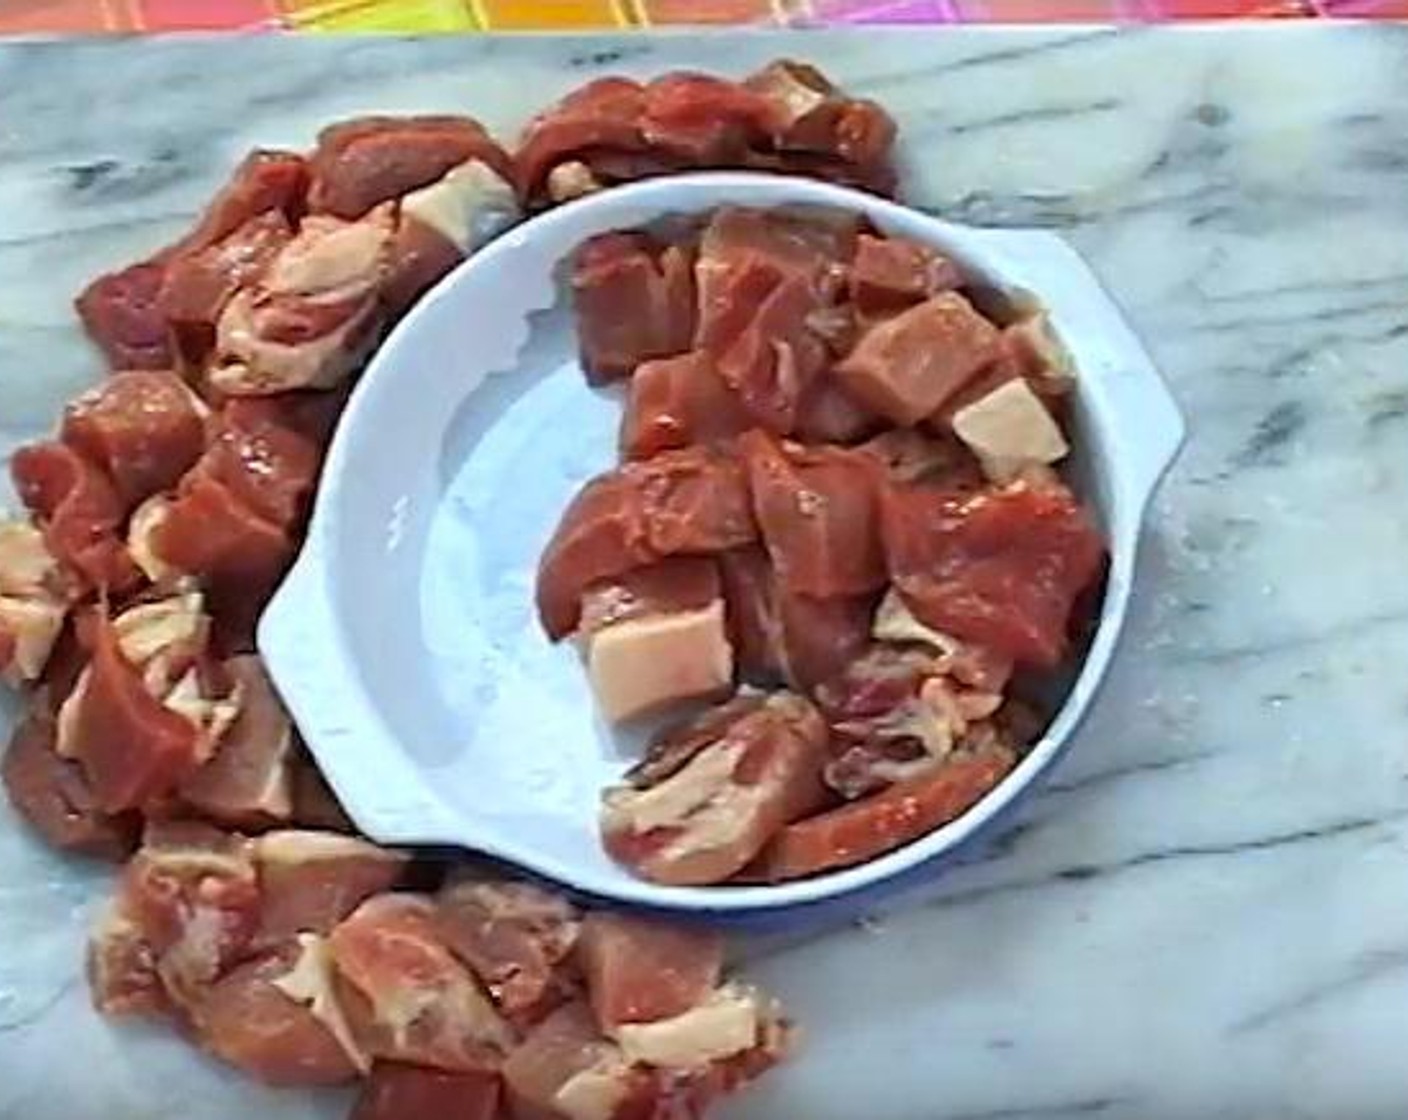 step 1 Cut the boneless Beef (10.5 oz) and Pork (7 oz) into medium sized pieces and mix them in a bowl.